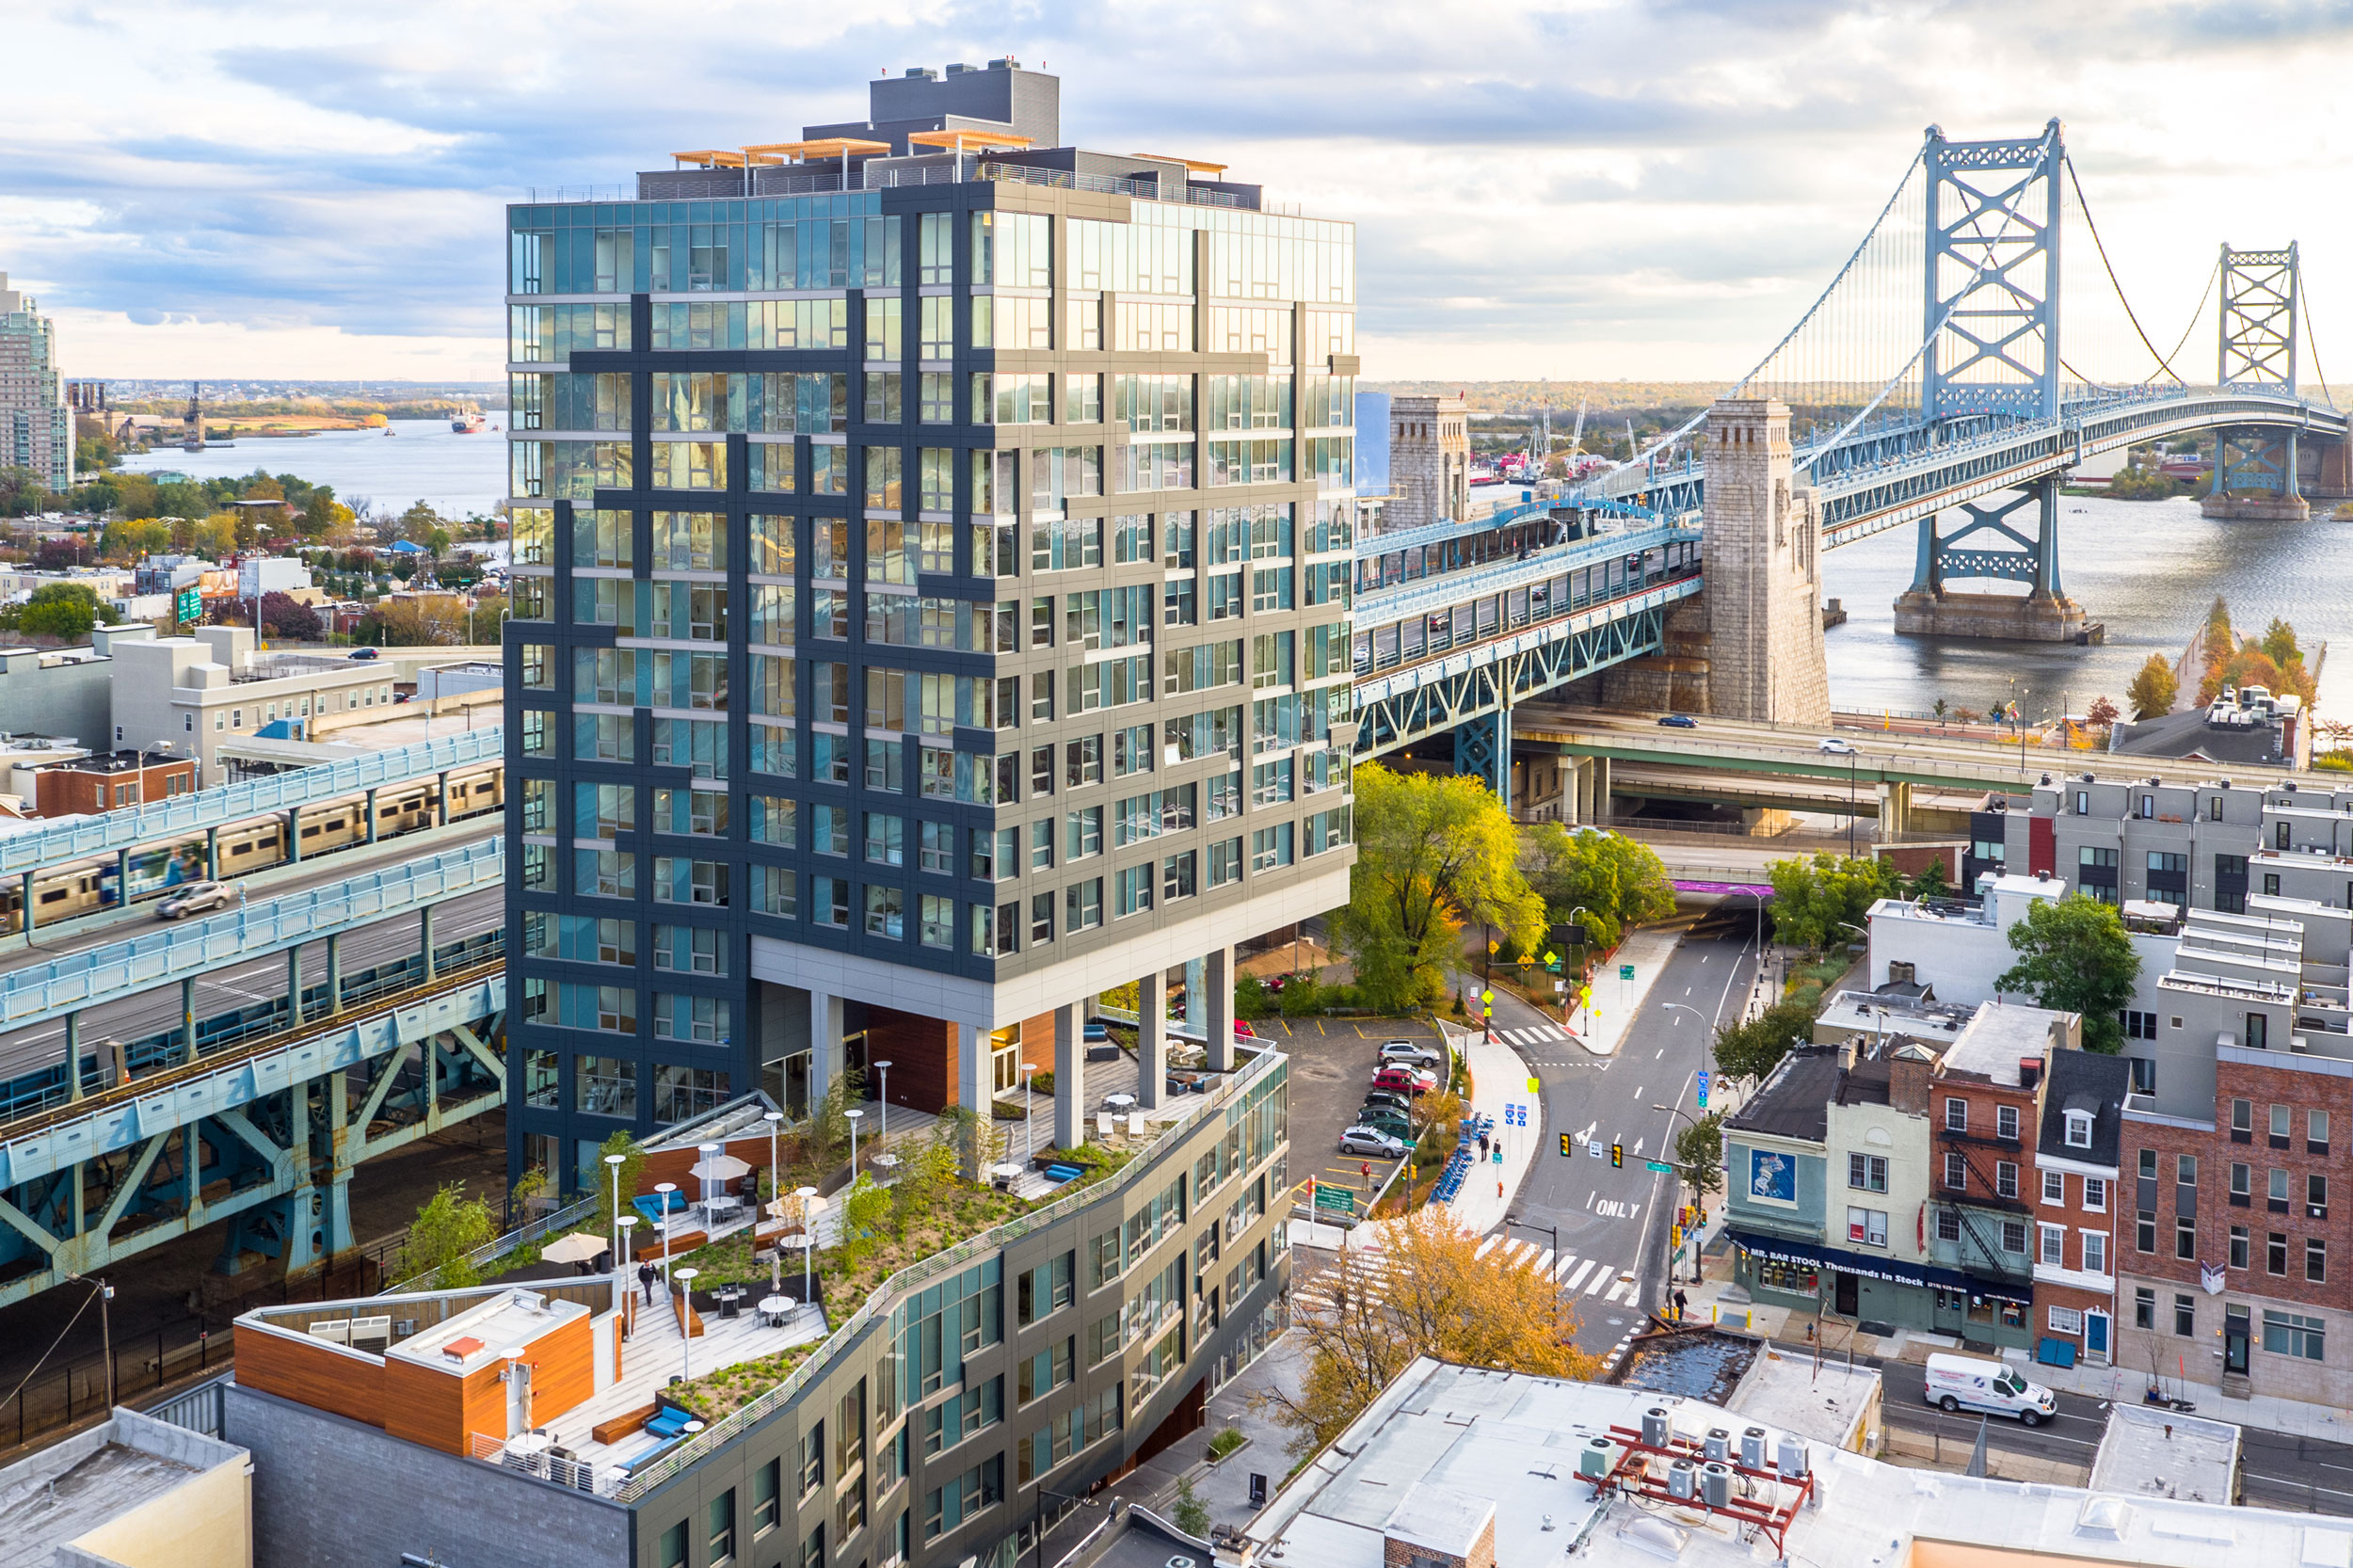 Bridge by GLUCK+ and The Sheward Partnership. Photo: Philly by Drone.